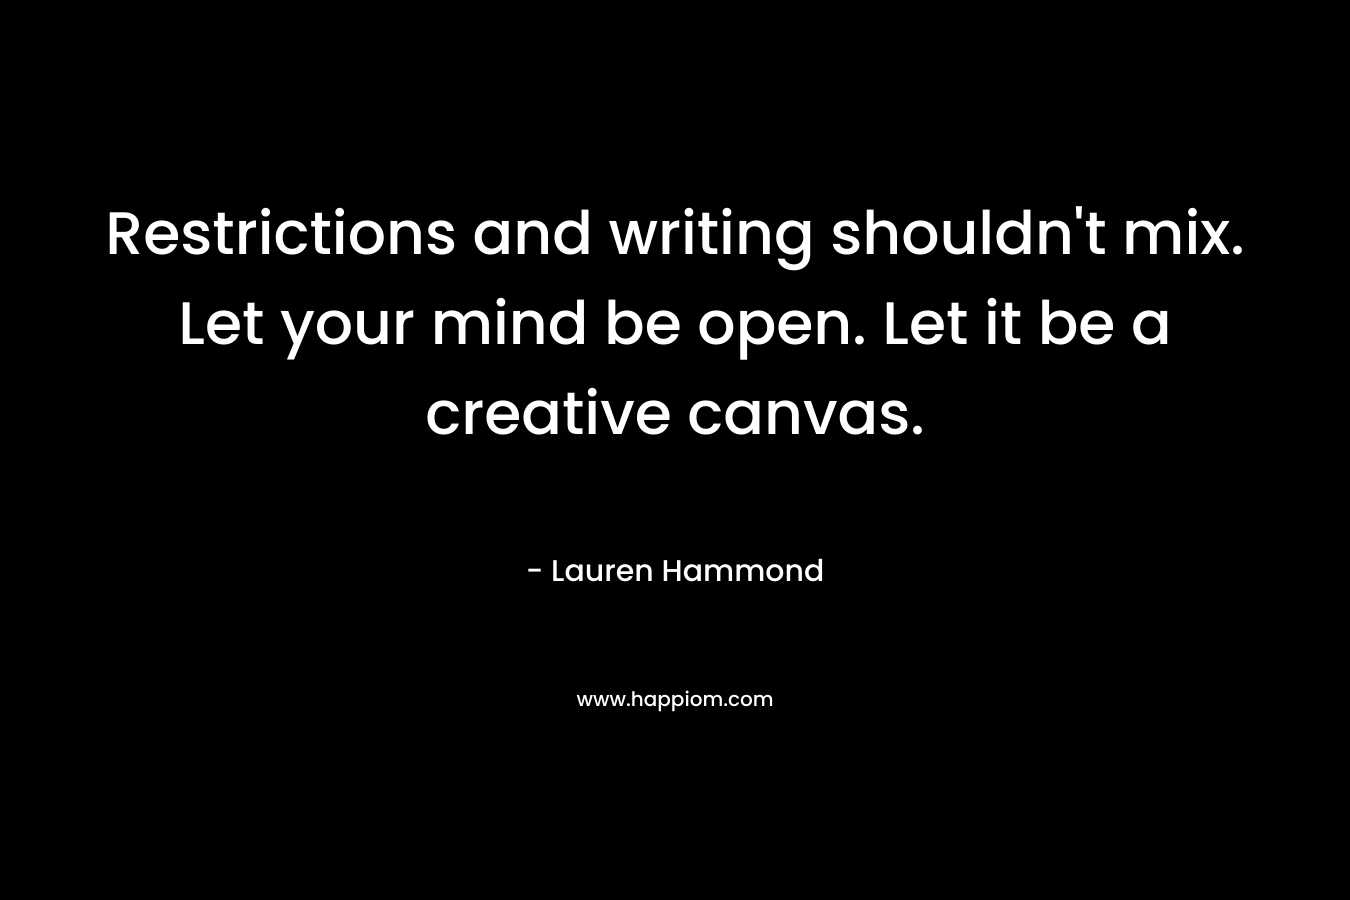 Restrictions and writing shouldn’t mix. Let your mind be open. Let it be a creative canvas. – Lauren Hammond